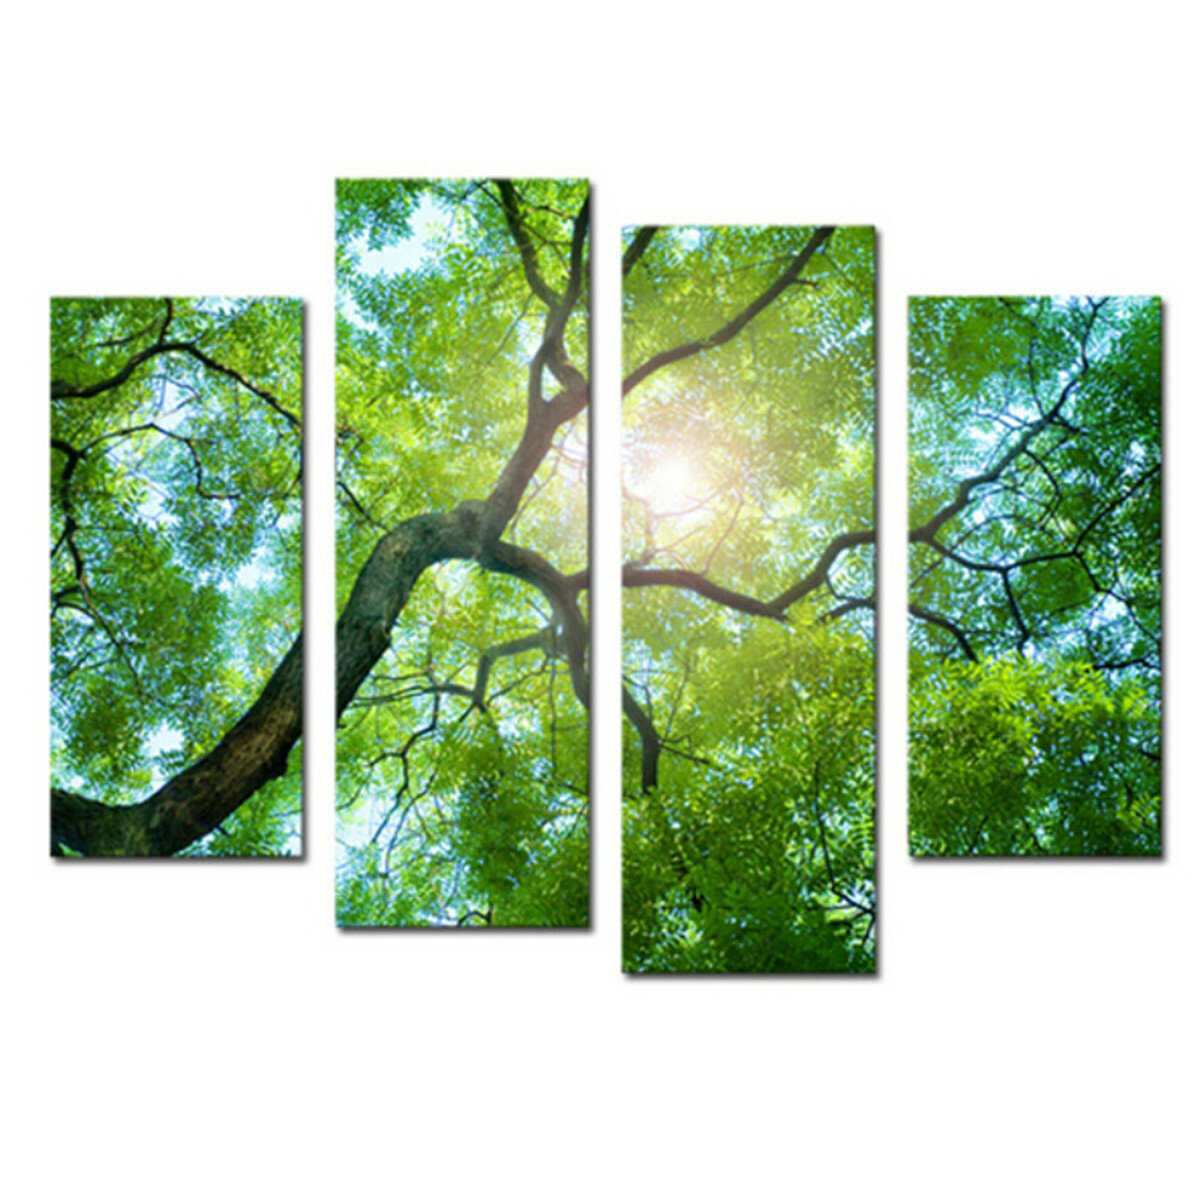 4Pcs Green Tree Canvas Paintings Wall Decorative Print Art Pictures Frameless Wall Hanging Decoratio